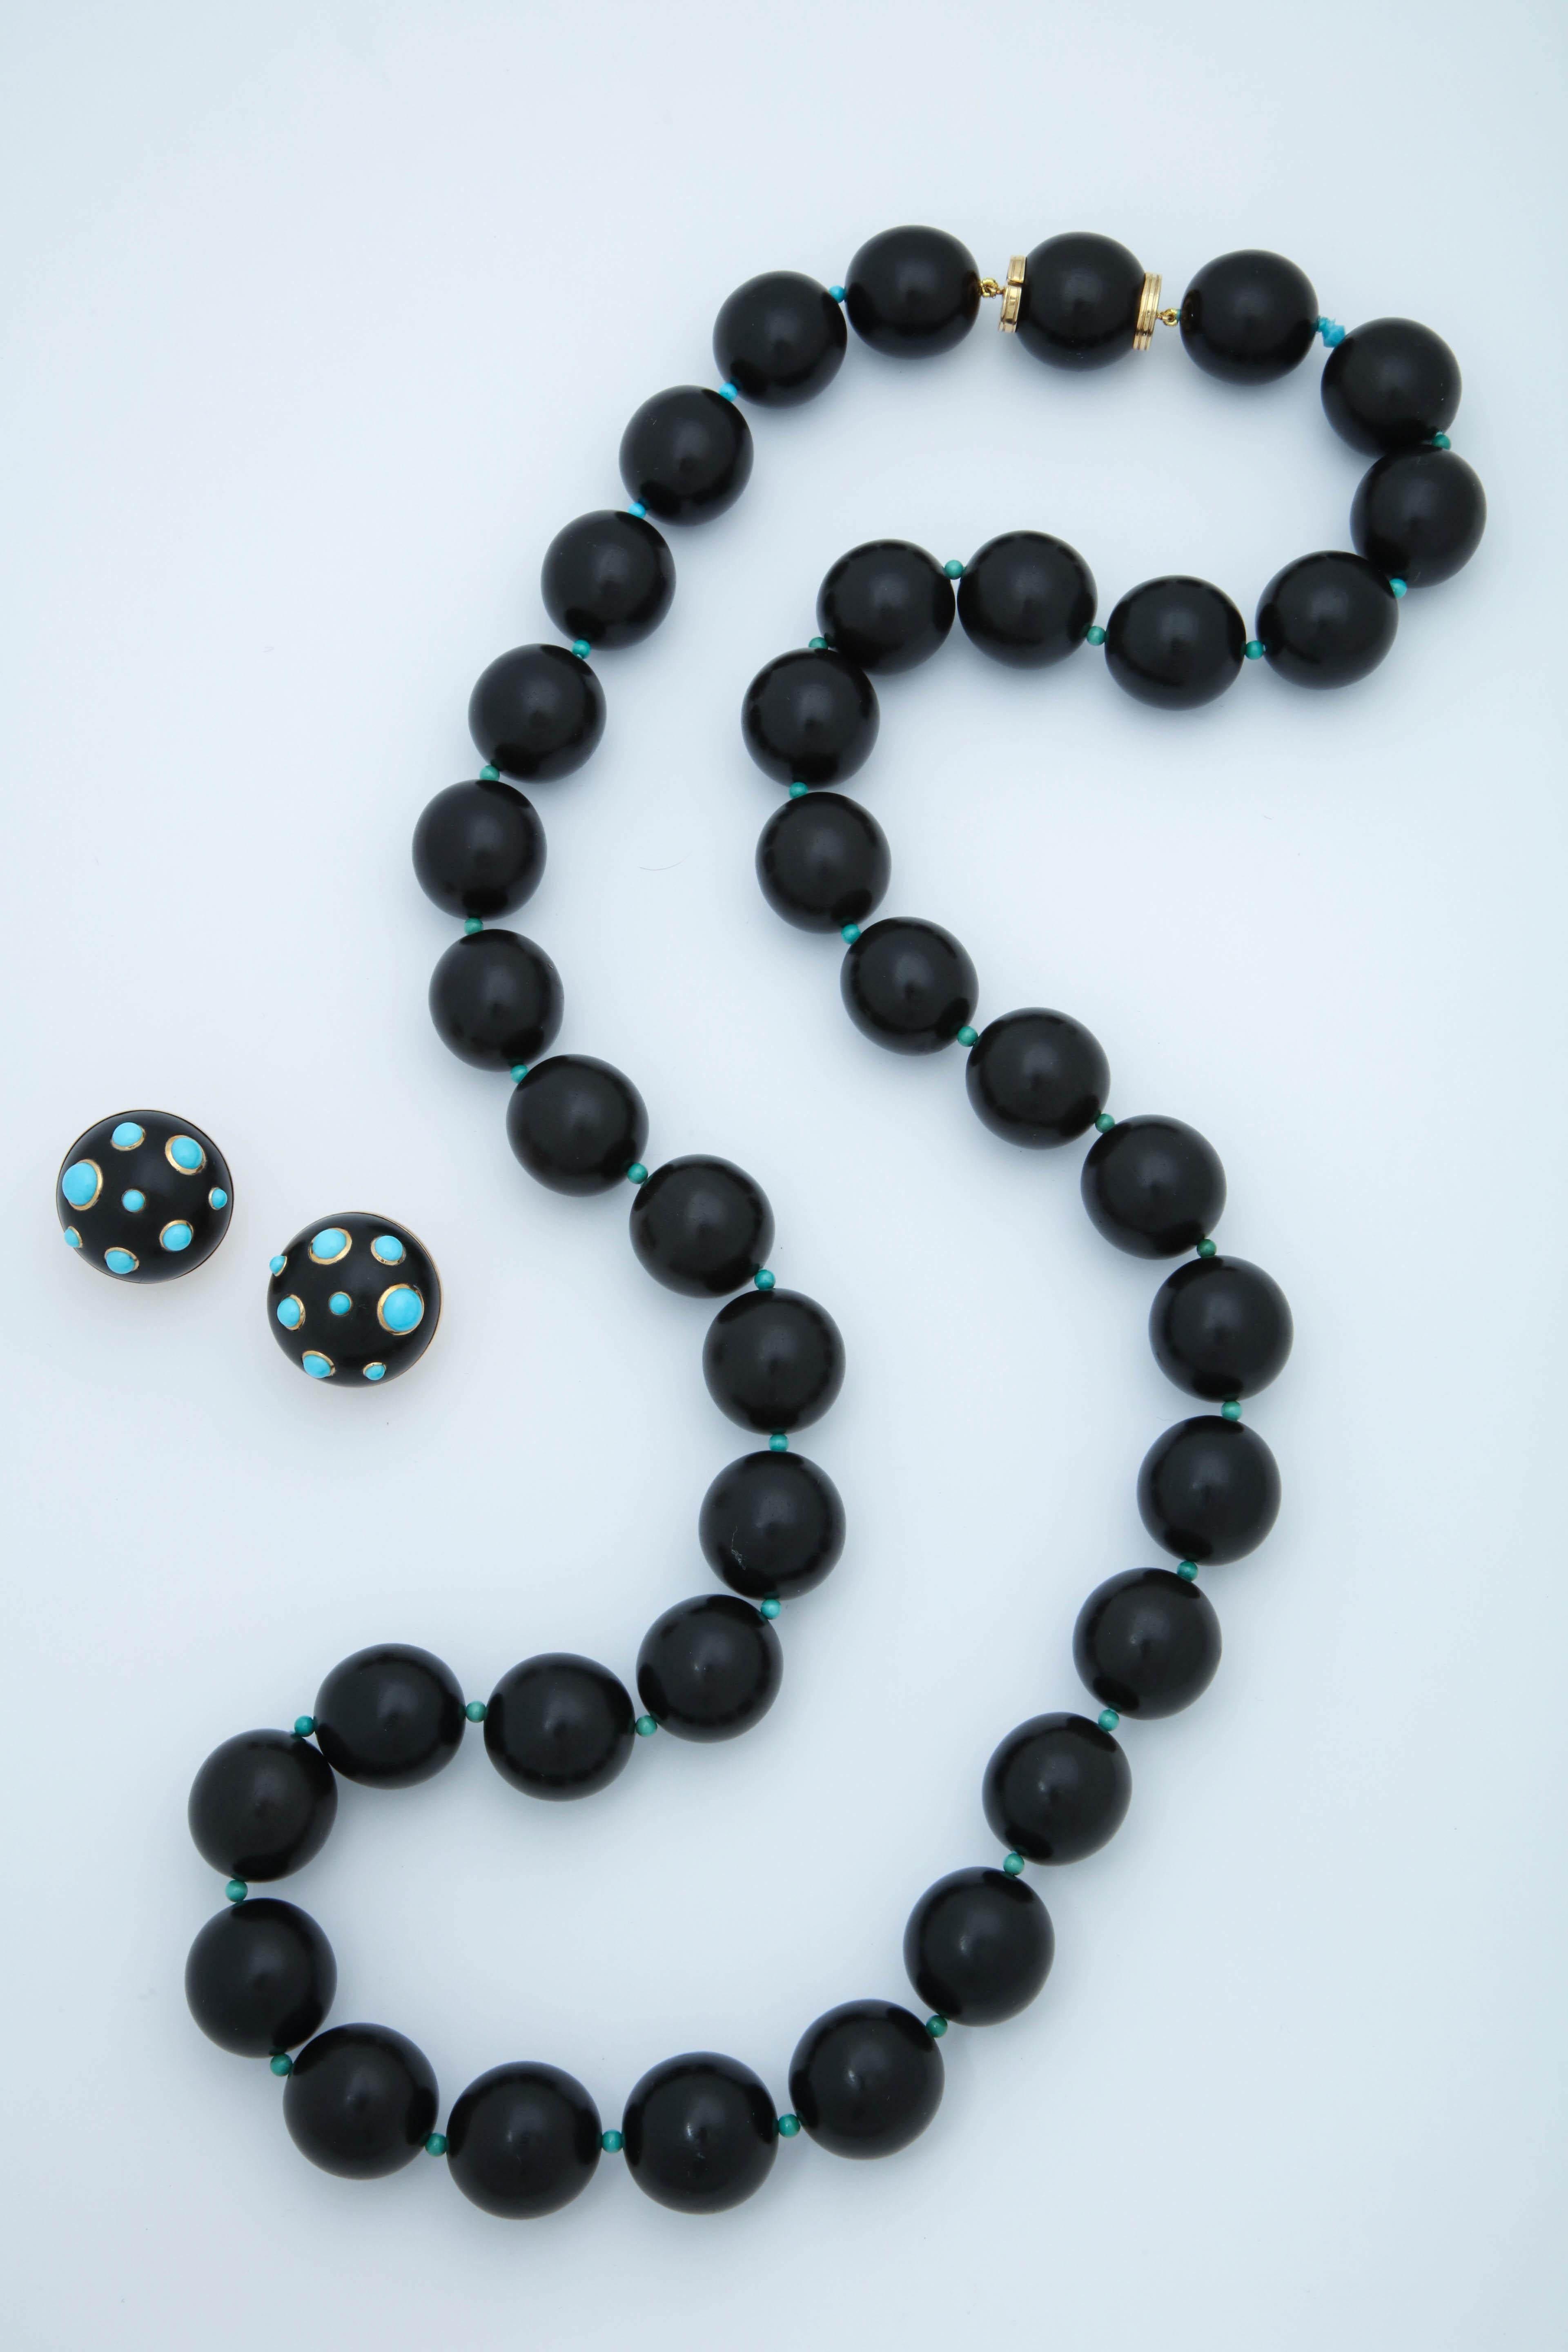 One Ladies 18kt Yellow Gold Ensemble Consisting Of One Pair Of Circular Cut Ebony Earclips Designed With [16] Bezel Set Cabochon Beautiful Color Turquoises.Measurement Of Earrings=Approximately 1InchX1 Inch. Serial # 35057 For Earrings. NOTE: Posts